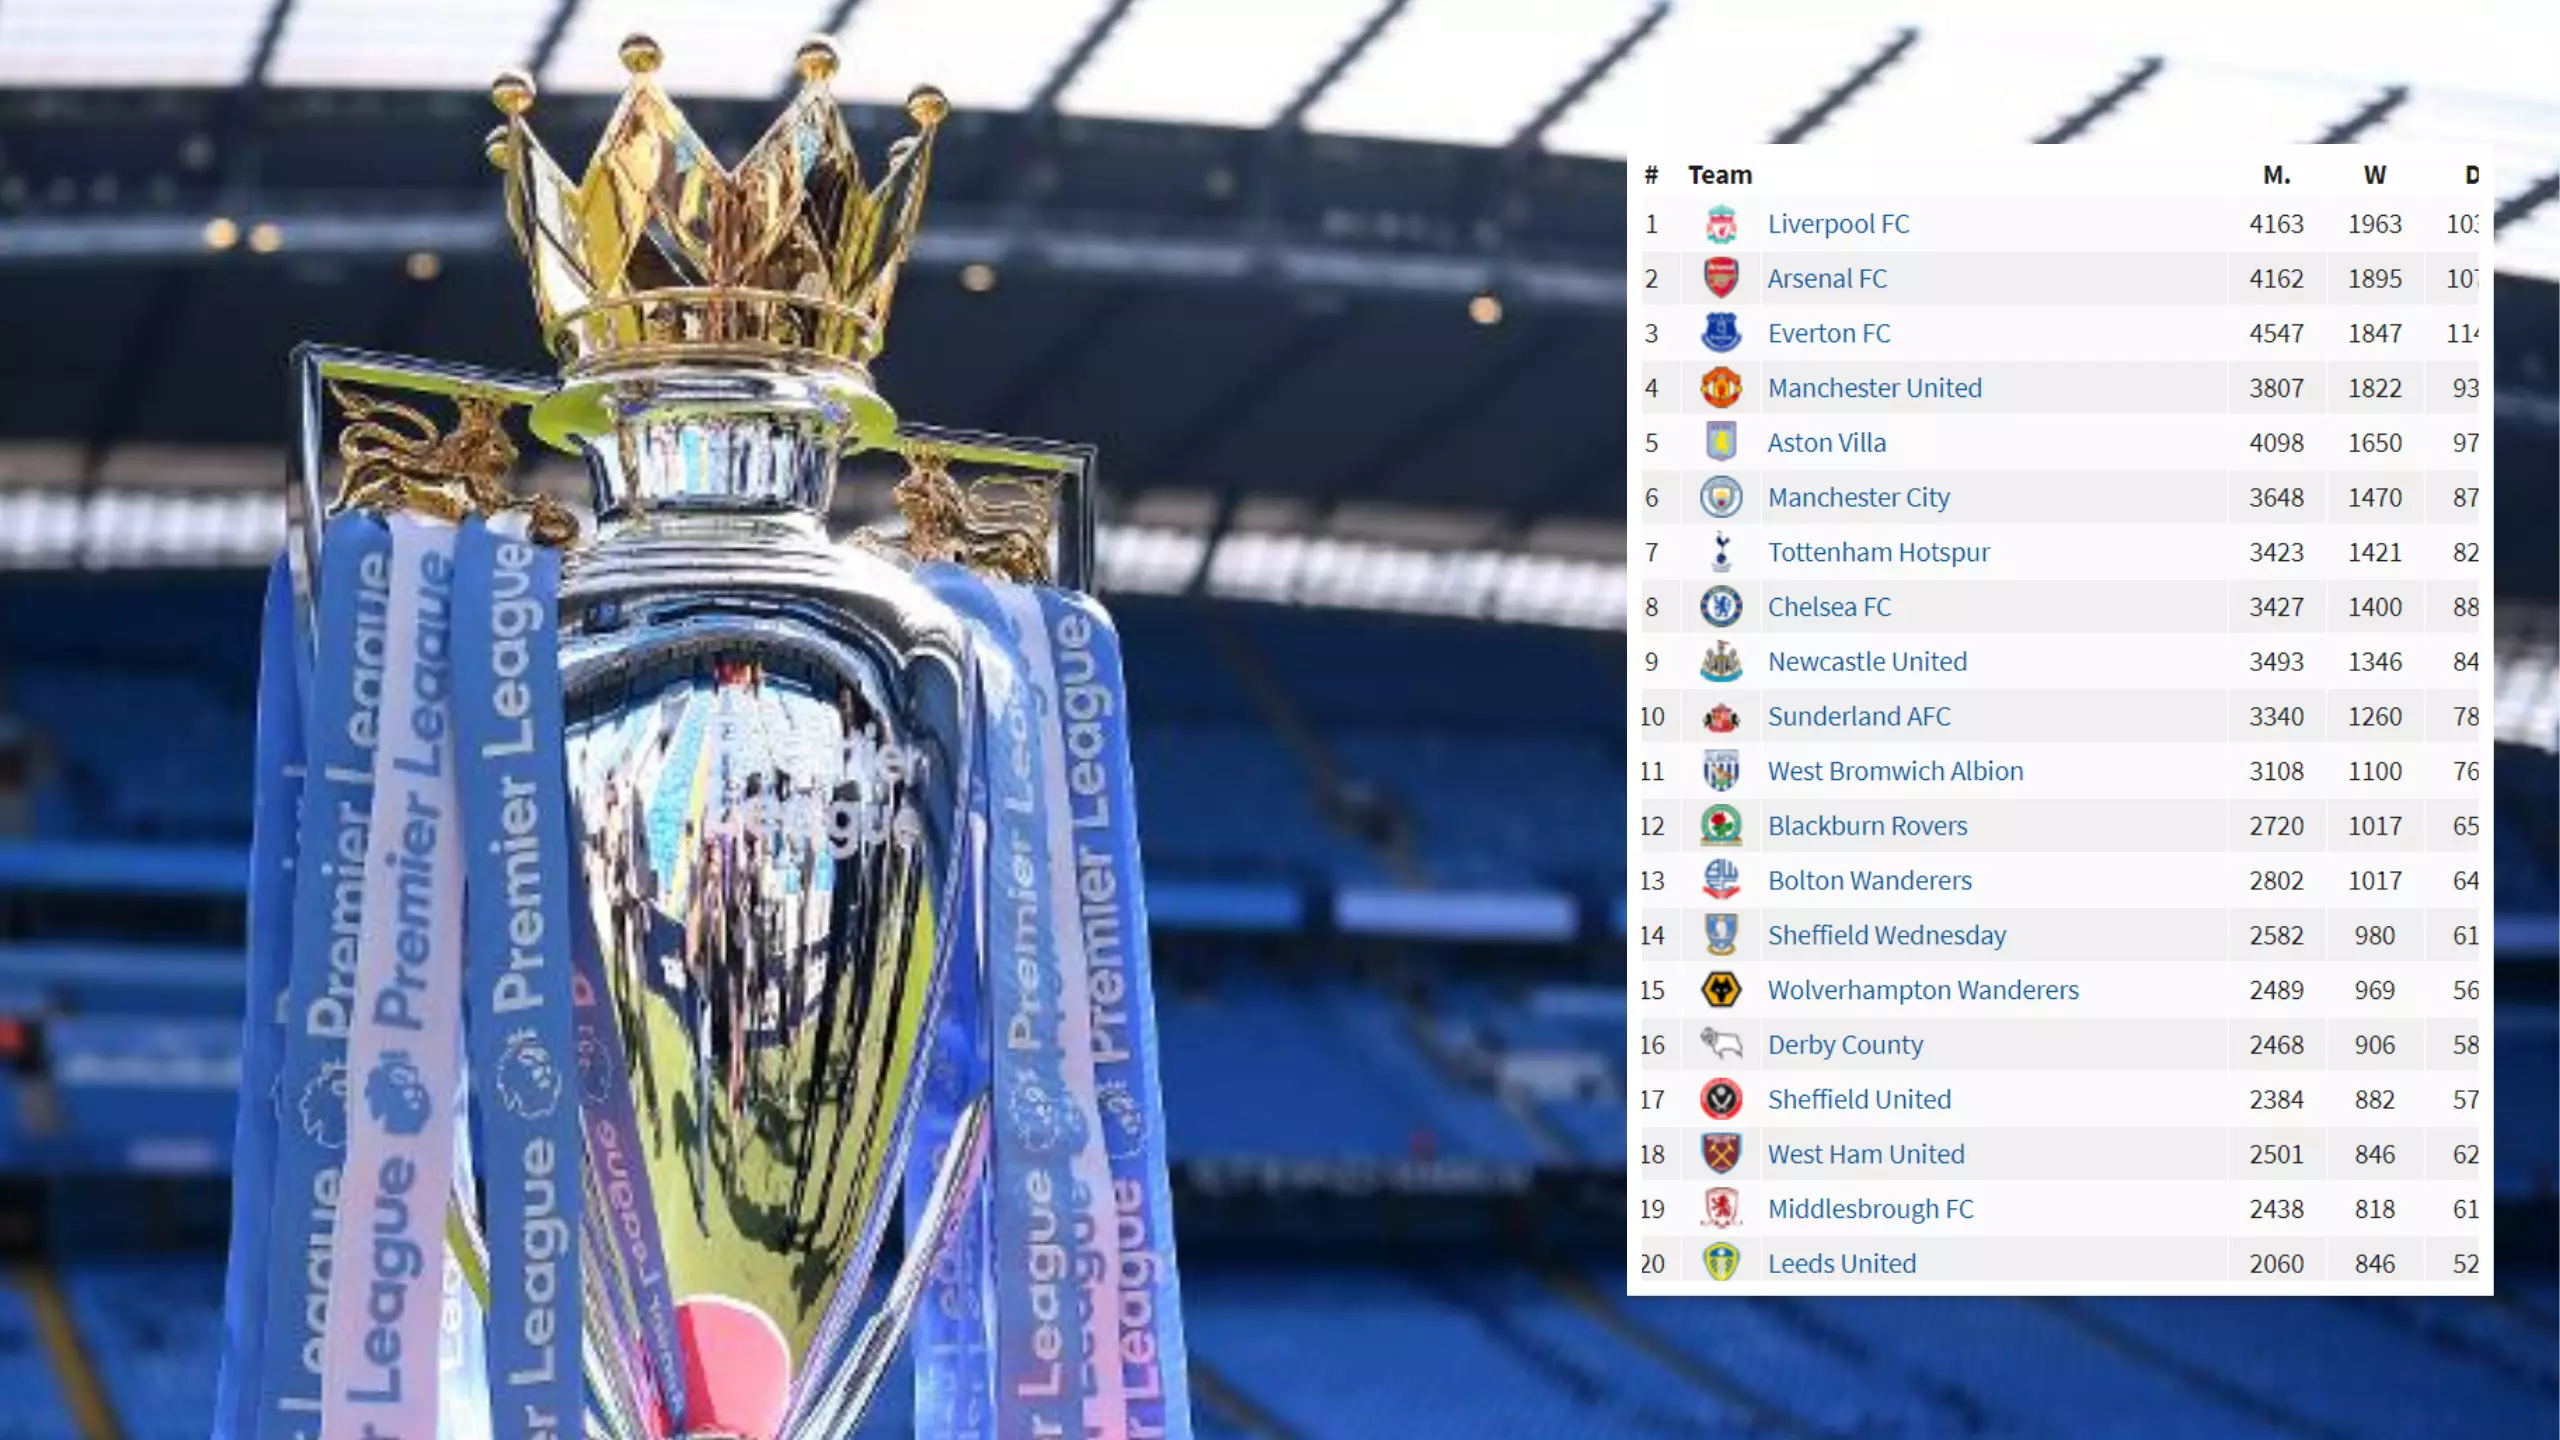 An All-Time Premier League And English First Division Table Has Been Created